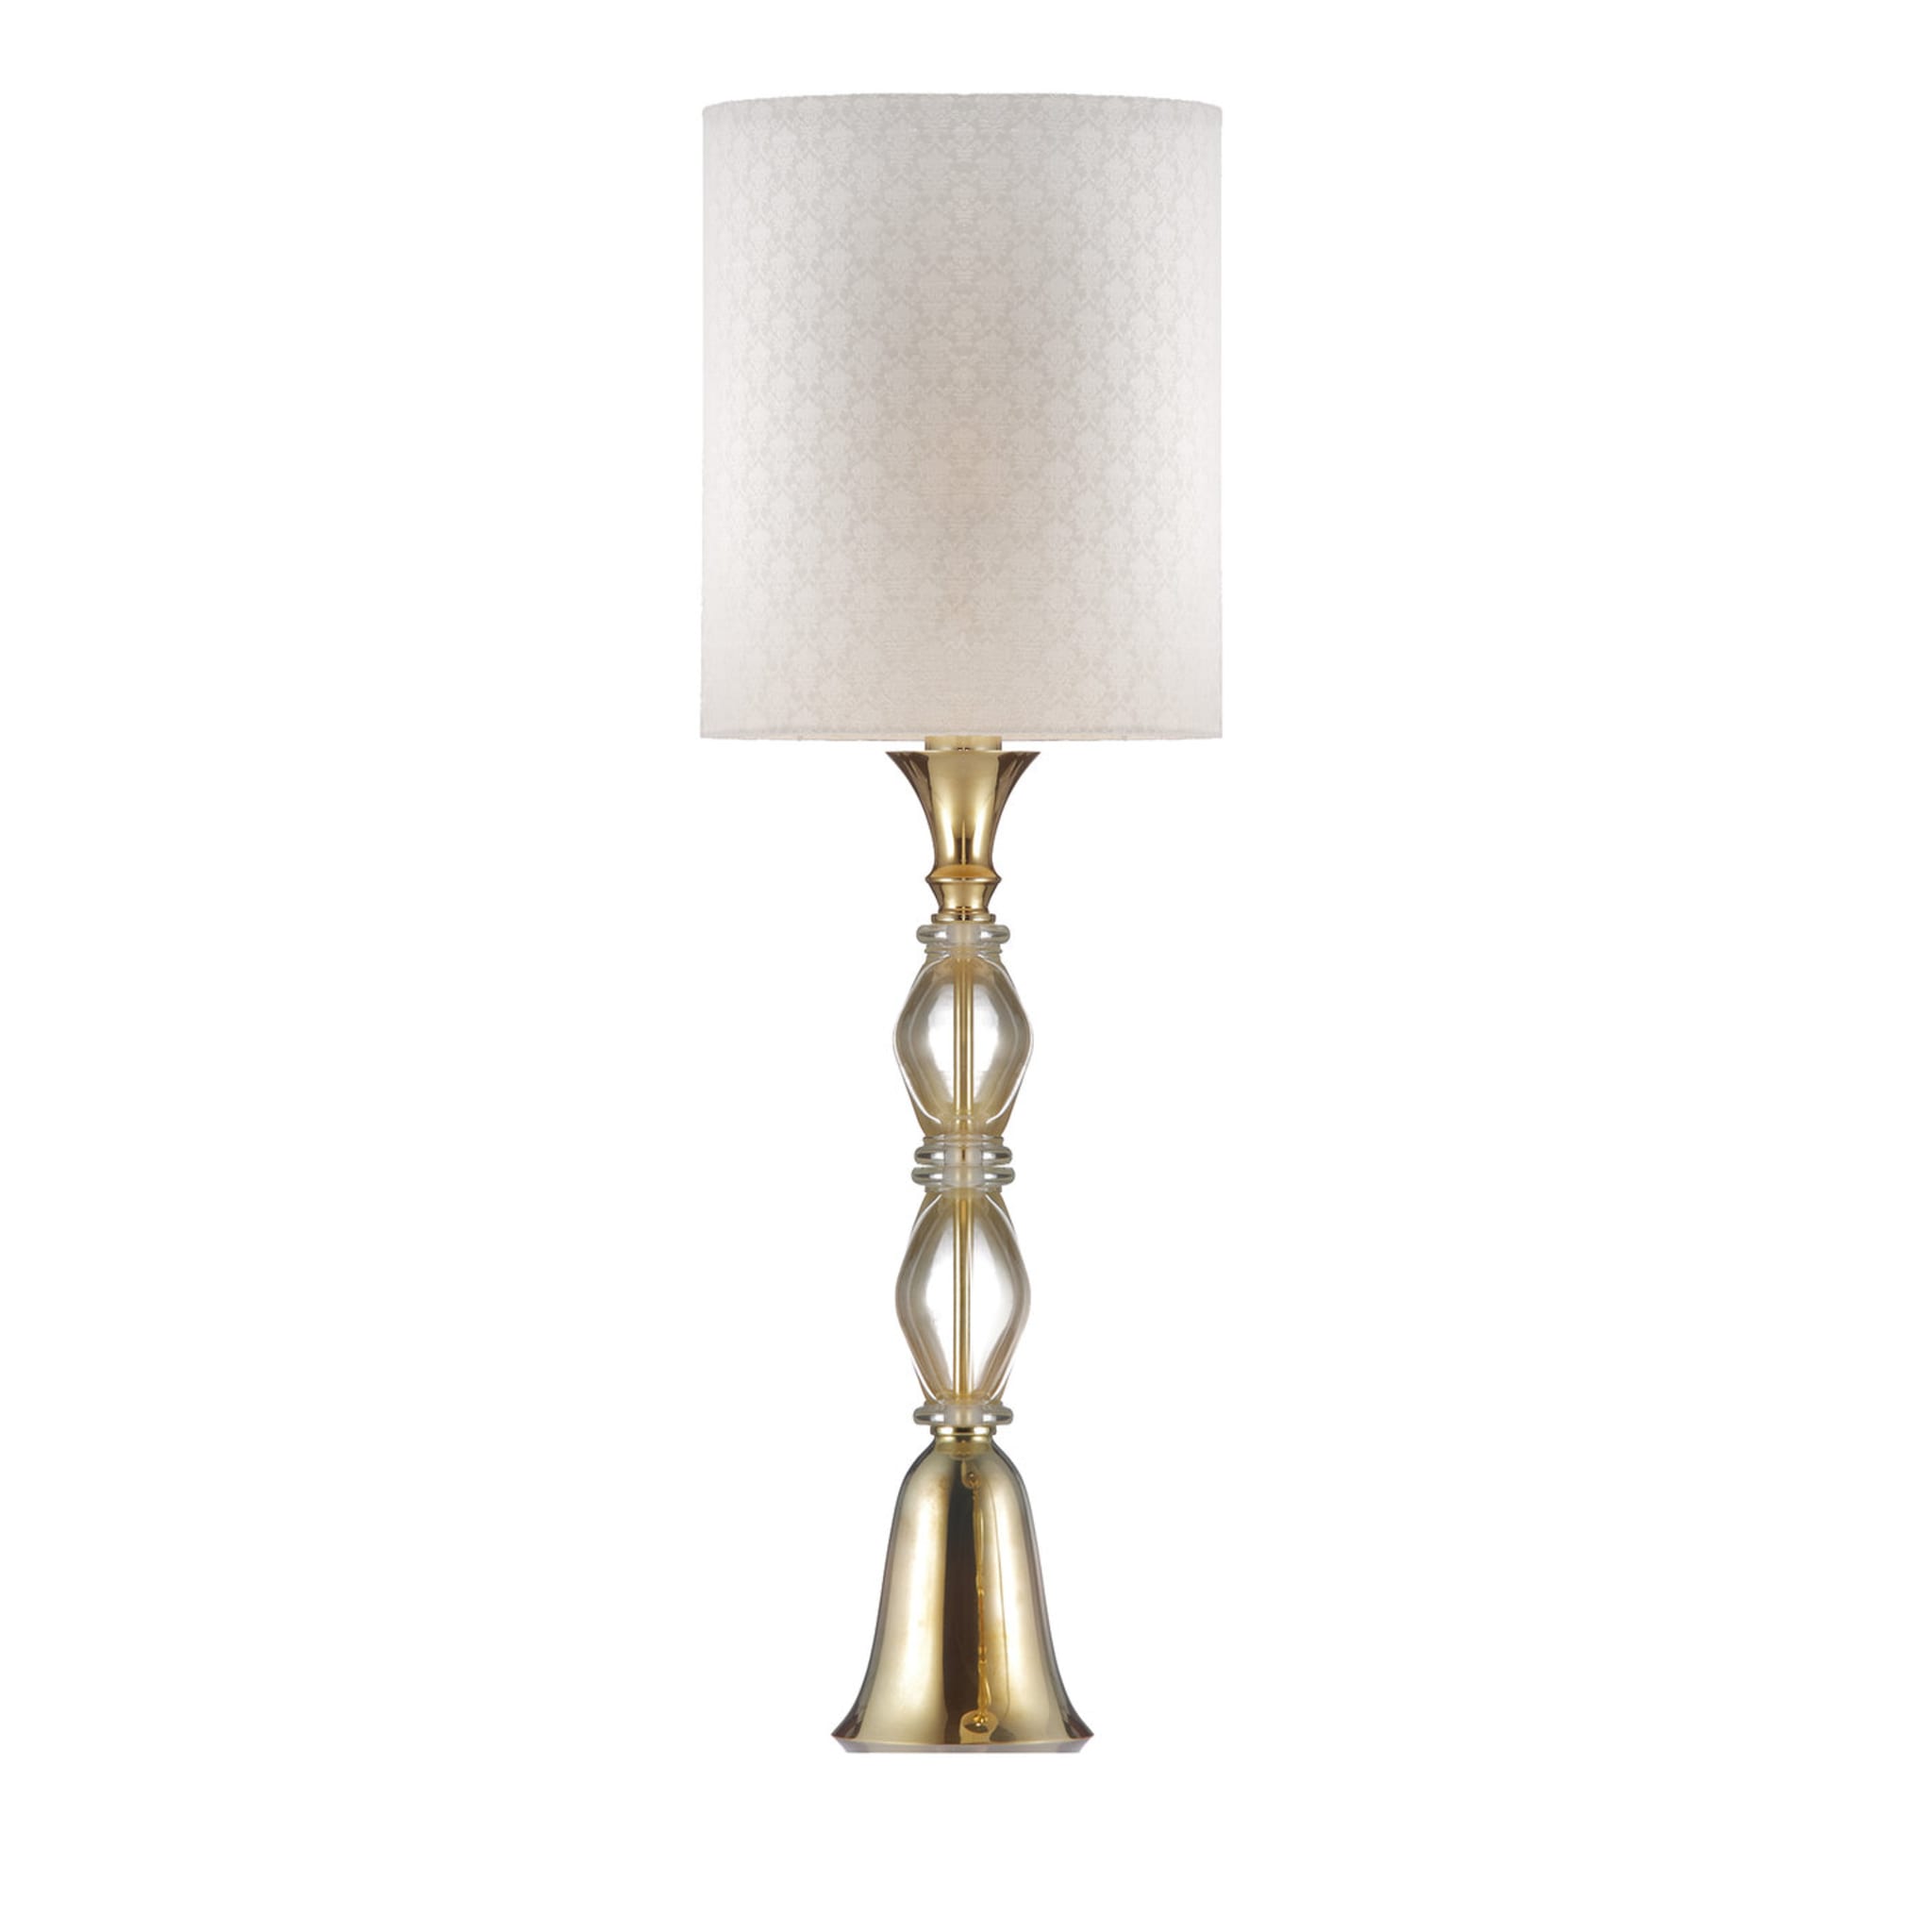 G-Gold Murano Large Table Lamp - Vue principale